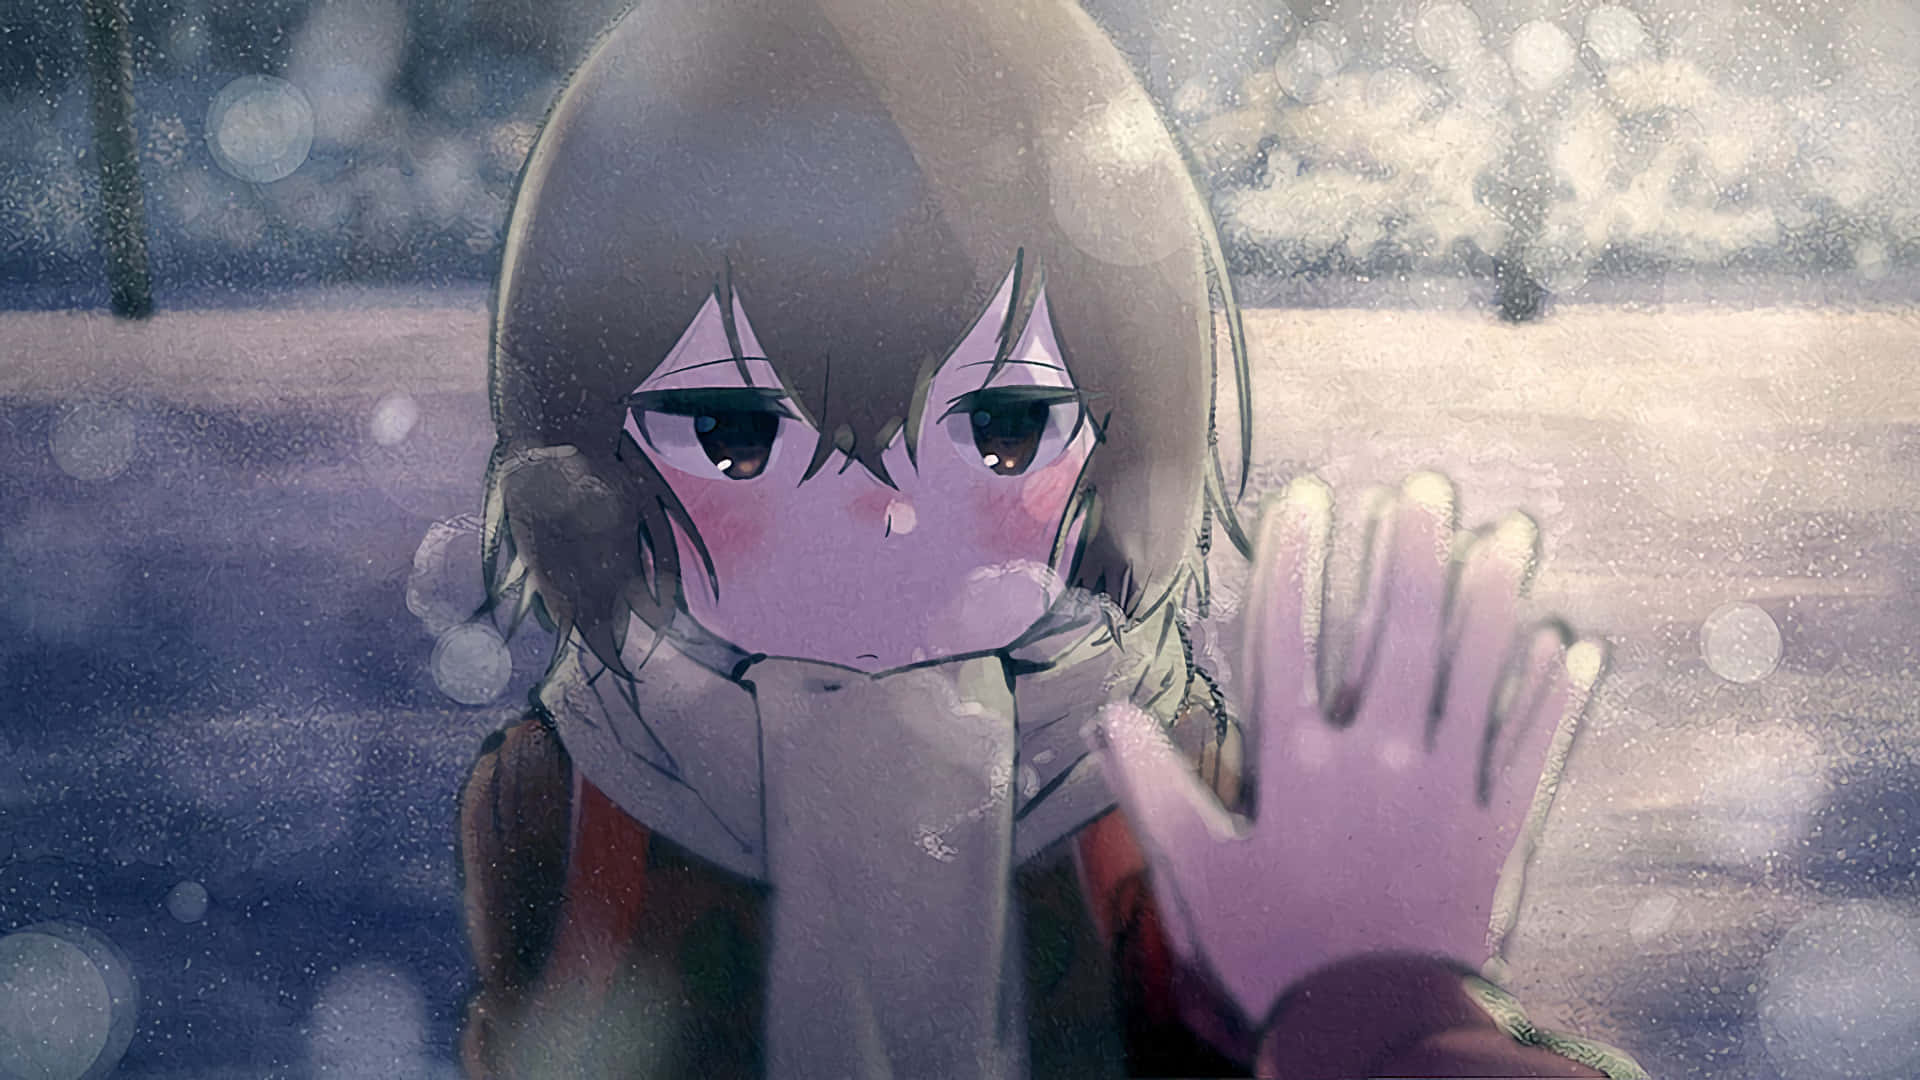 Why did the Erased anime end so badly? - Quora